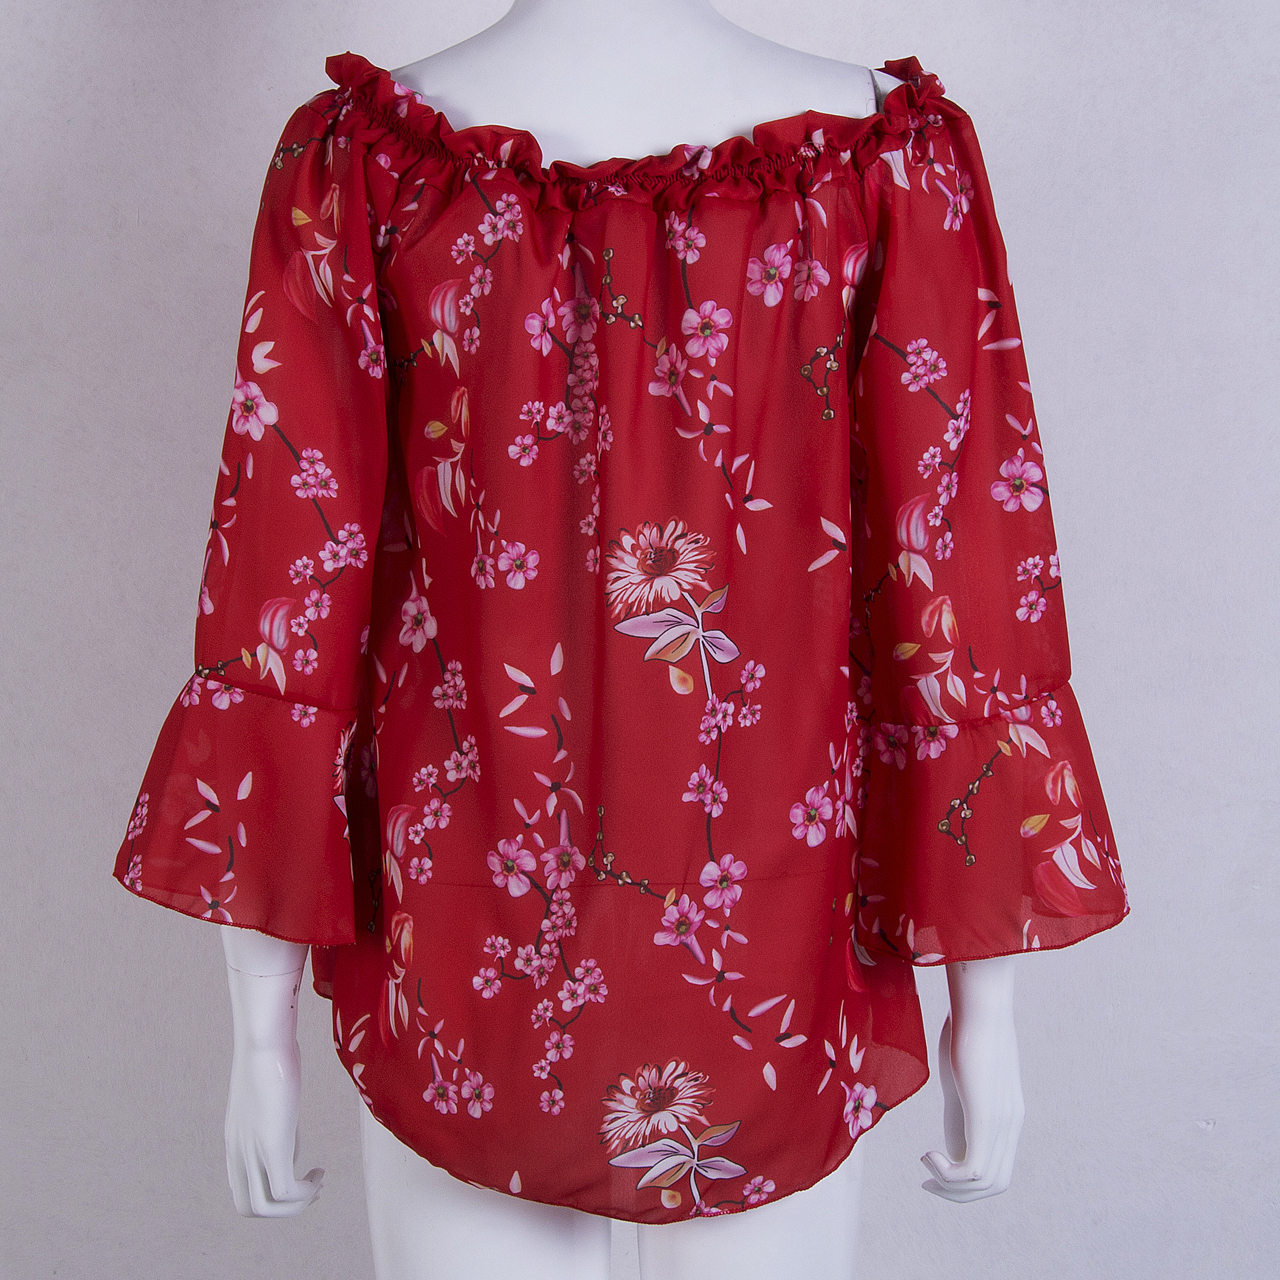 Fashion blouse Women's Off Shoulder flare Long sleeve red gorgeous flower Tops Shirt Casual Blouse Loose Crop female